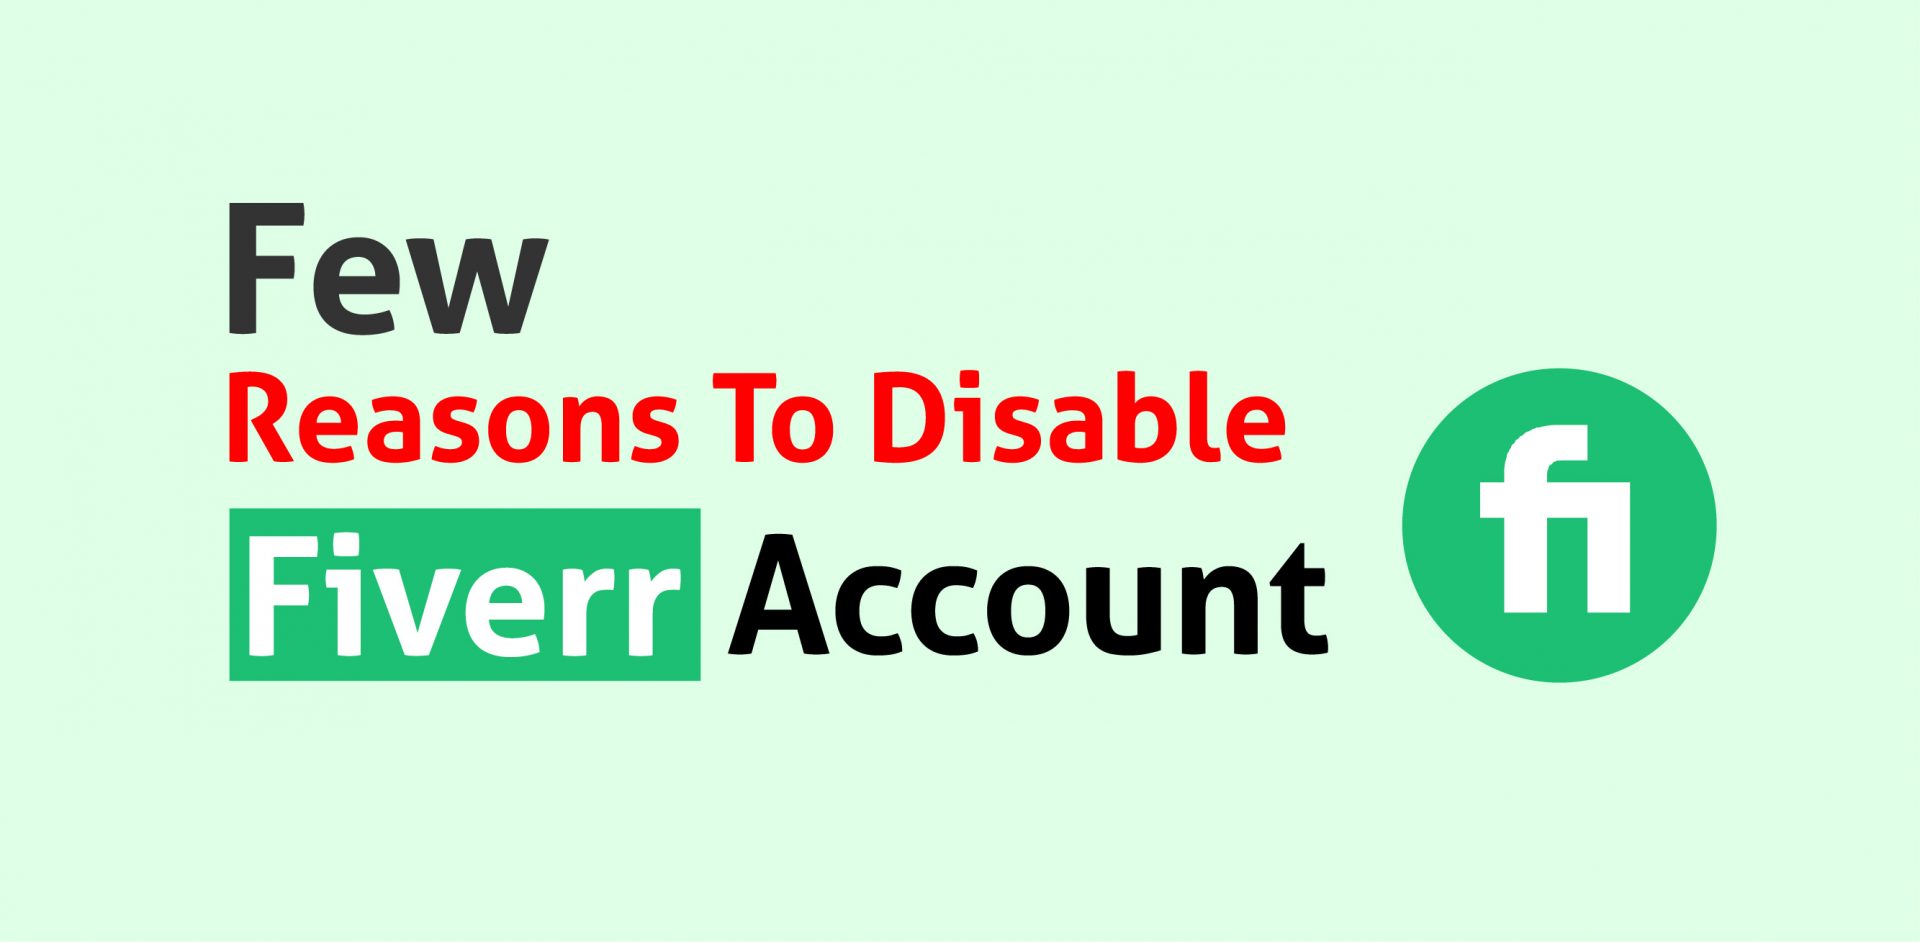 Few Reasons to disable fiverr account